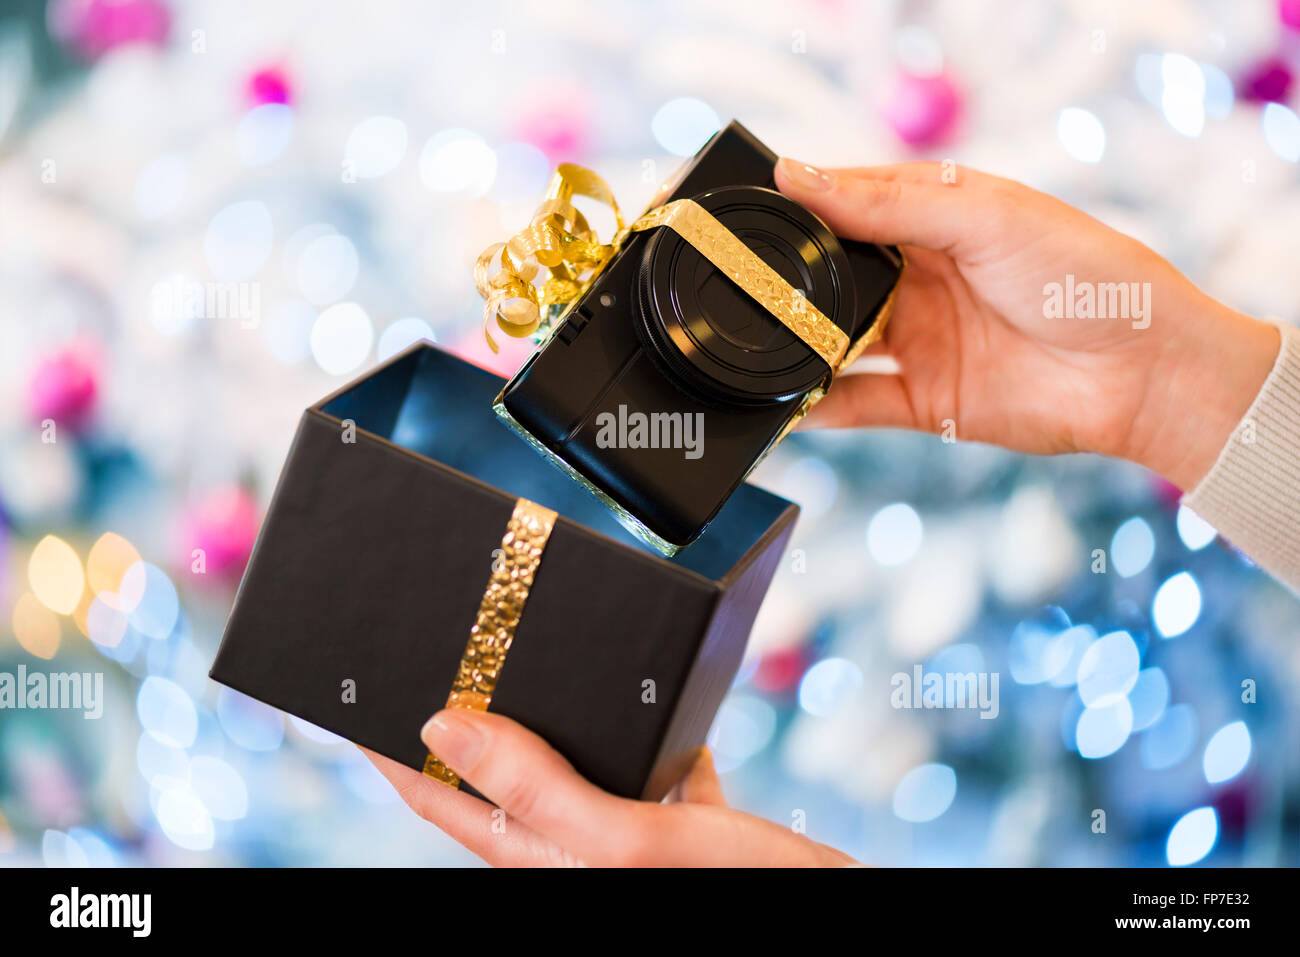 Woman discovers a digital compact photo camera in Christmas present. Boke christmas tree background Stock Photo